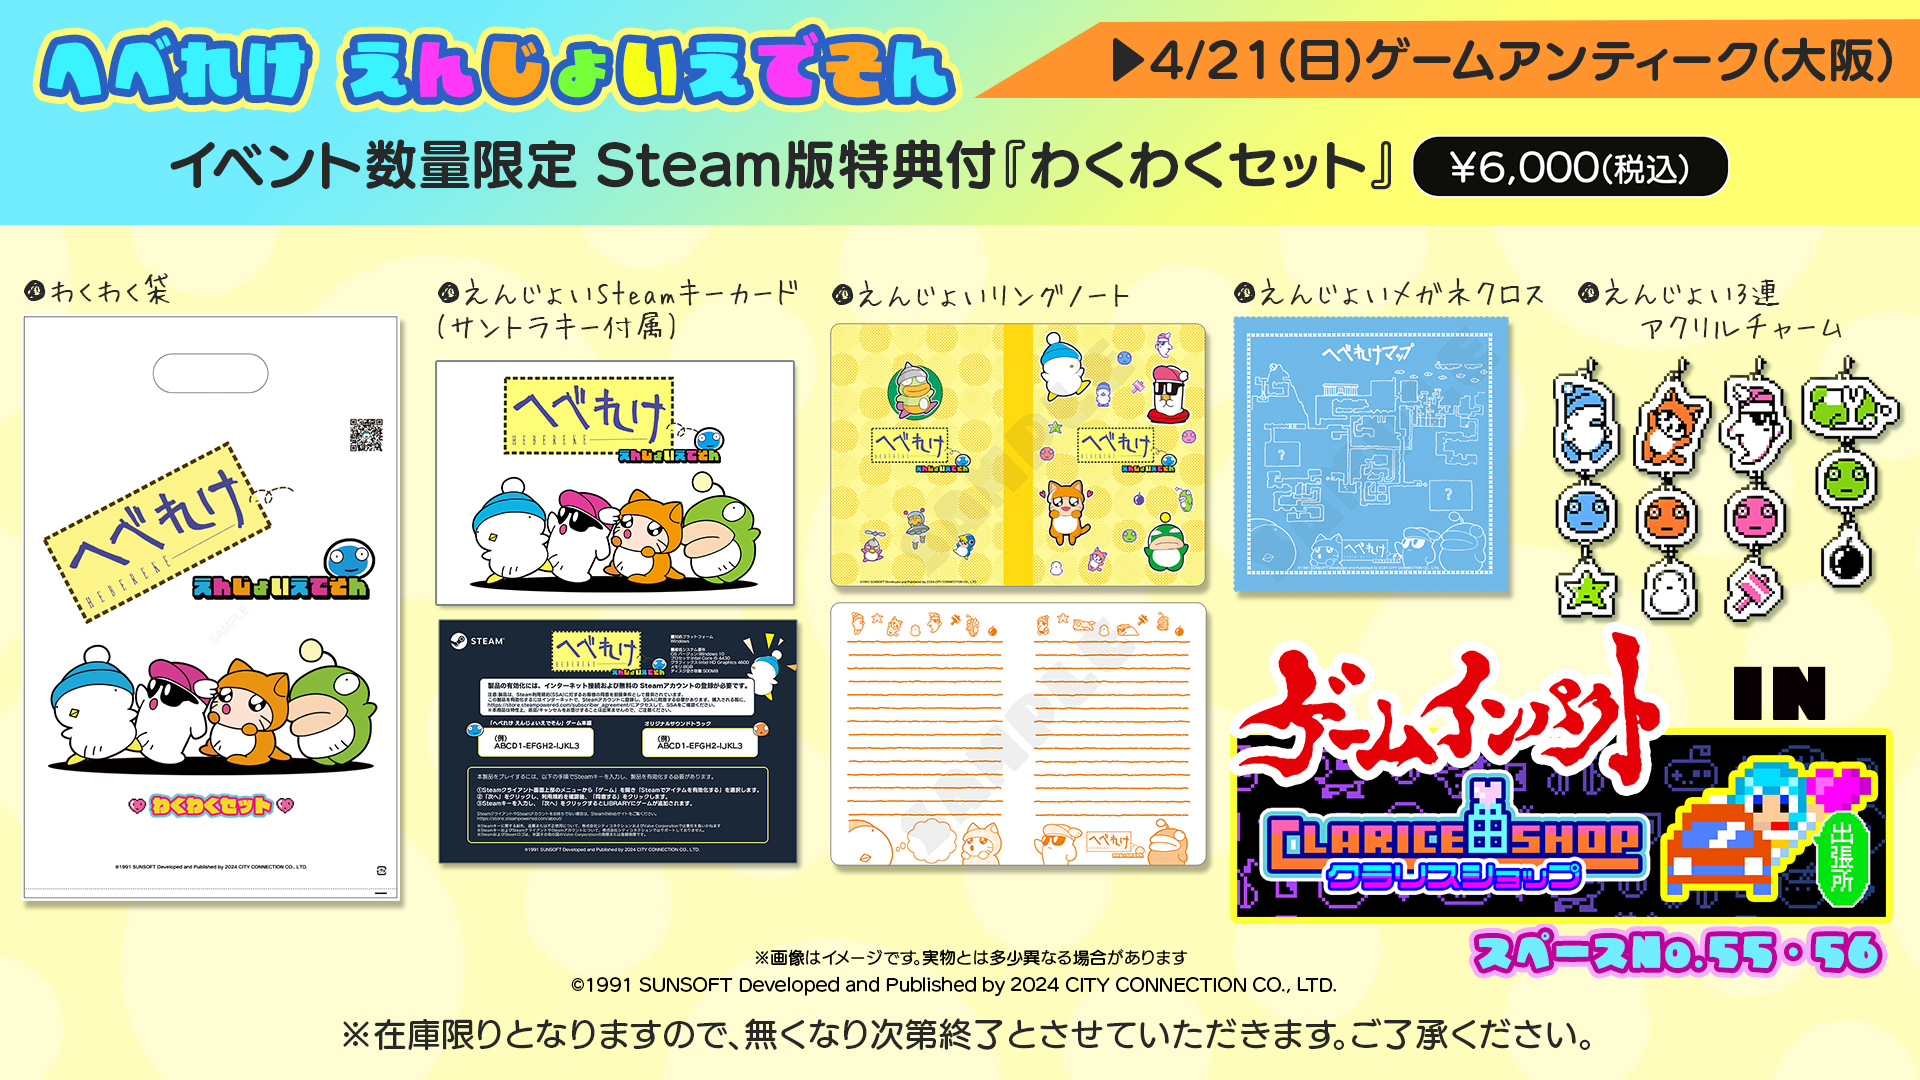 Notice of consignment sale of “Enjoy Set” with bonus for Steam version